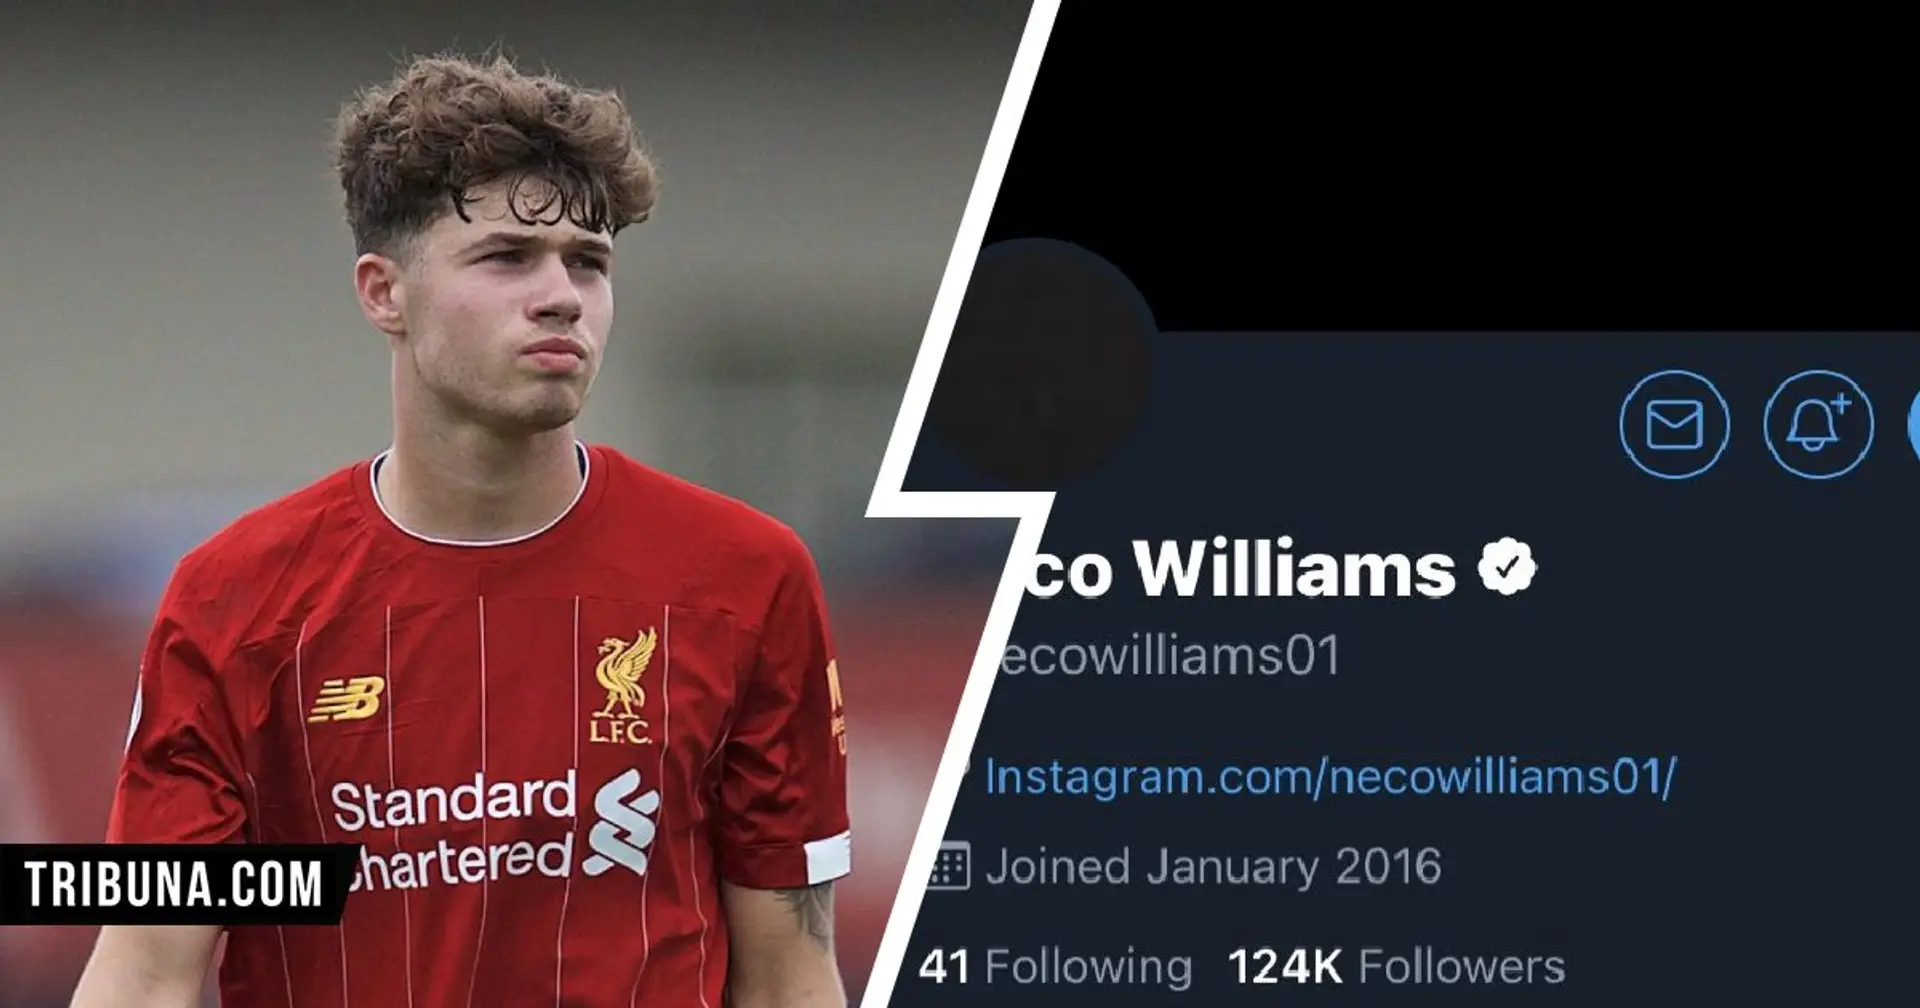 Neco Williams blacks out social media after receiving abuse from Liverpool fans